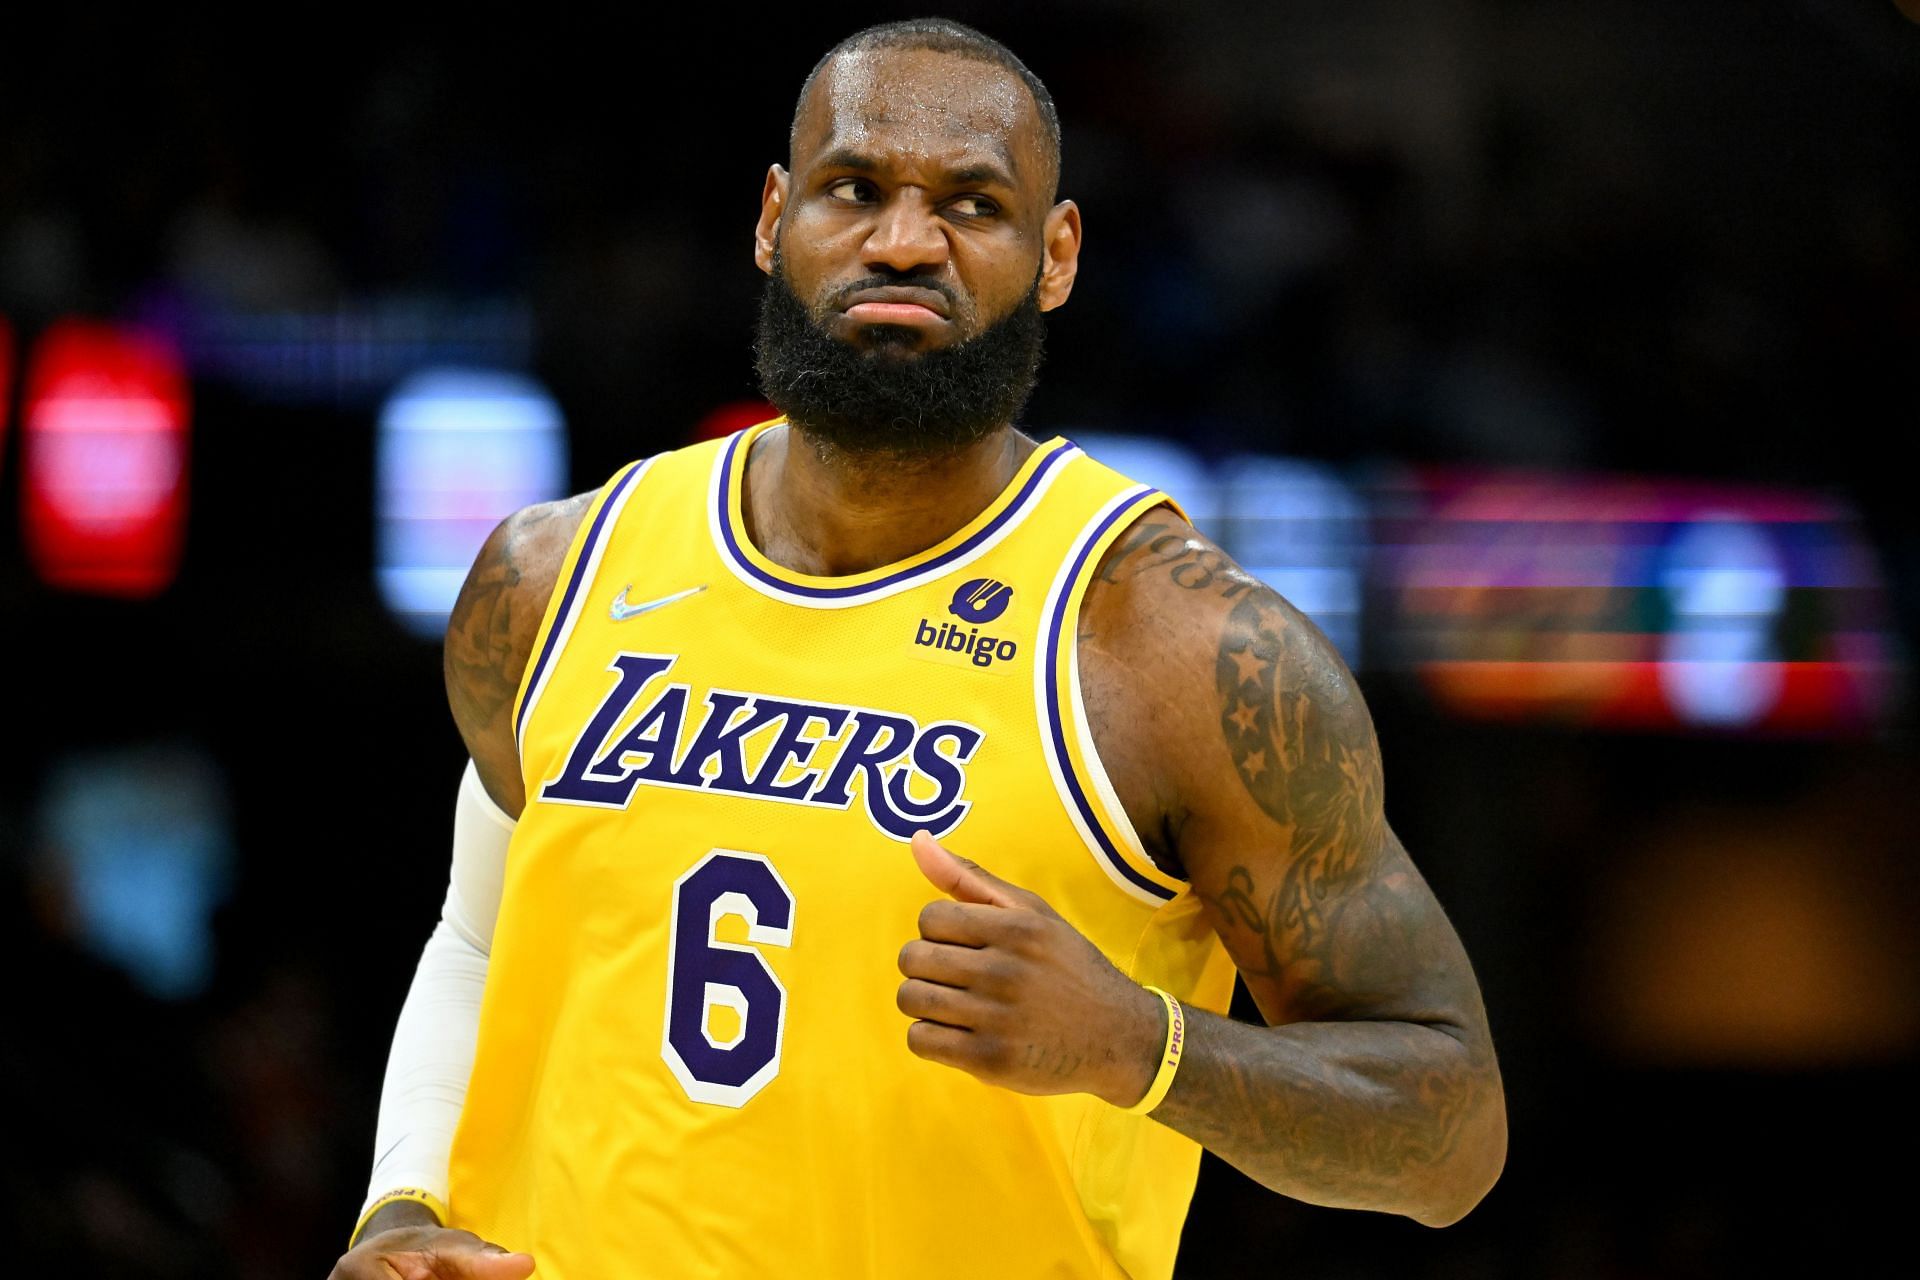 LeBron James (#6) of the Los Angeles Lakers